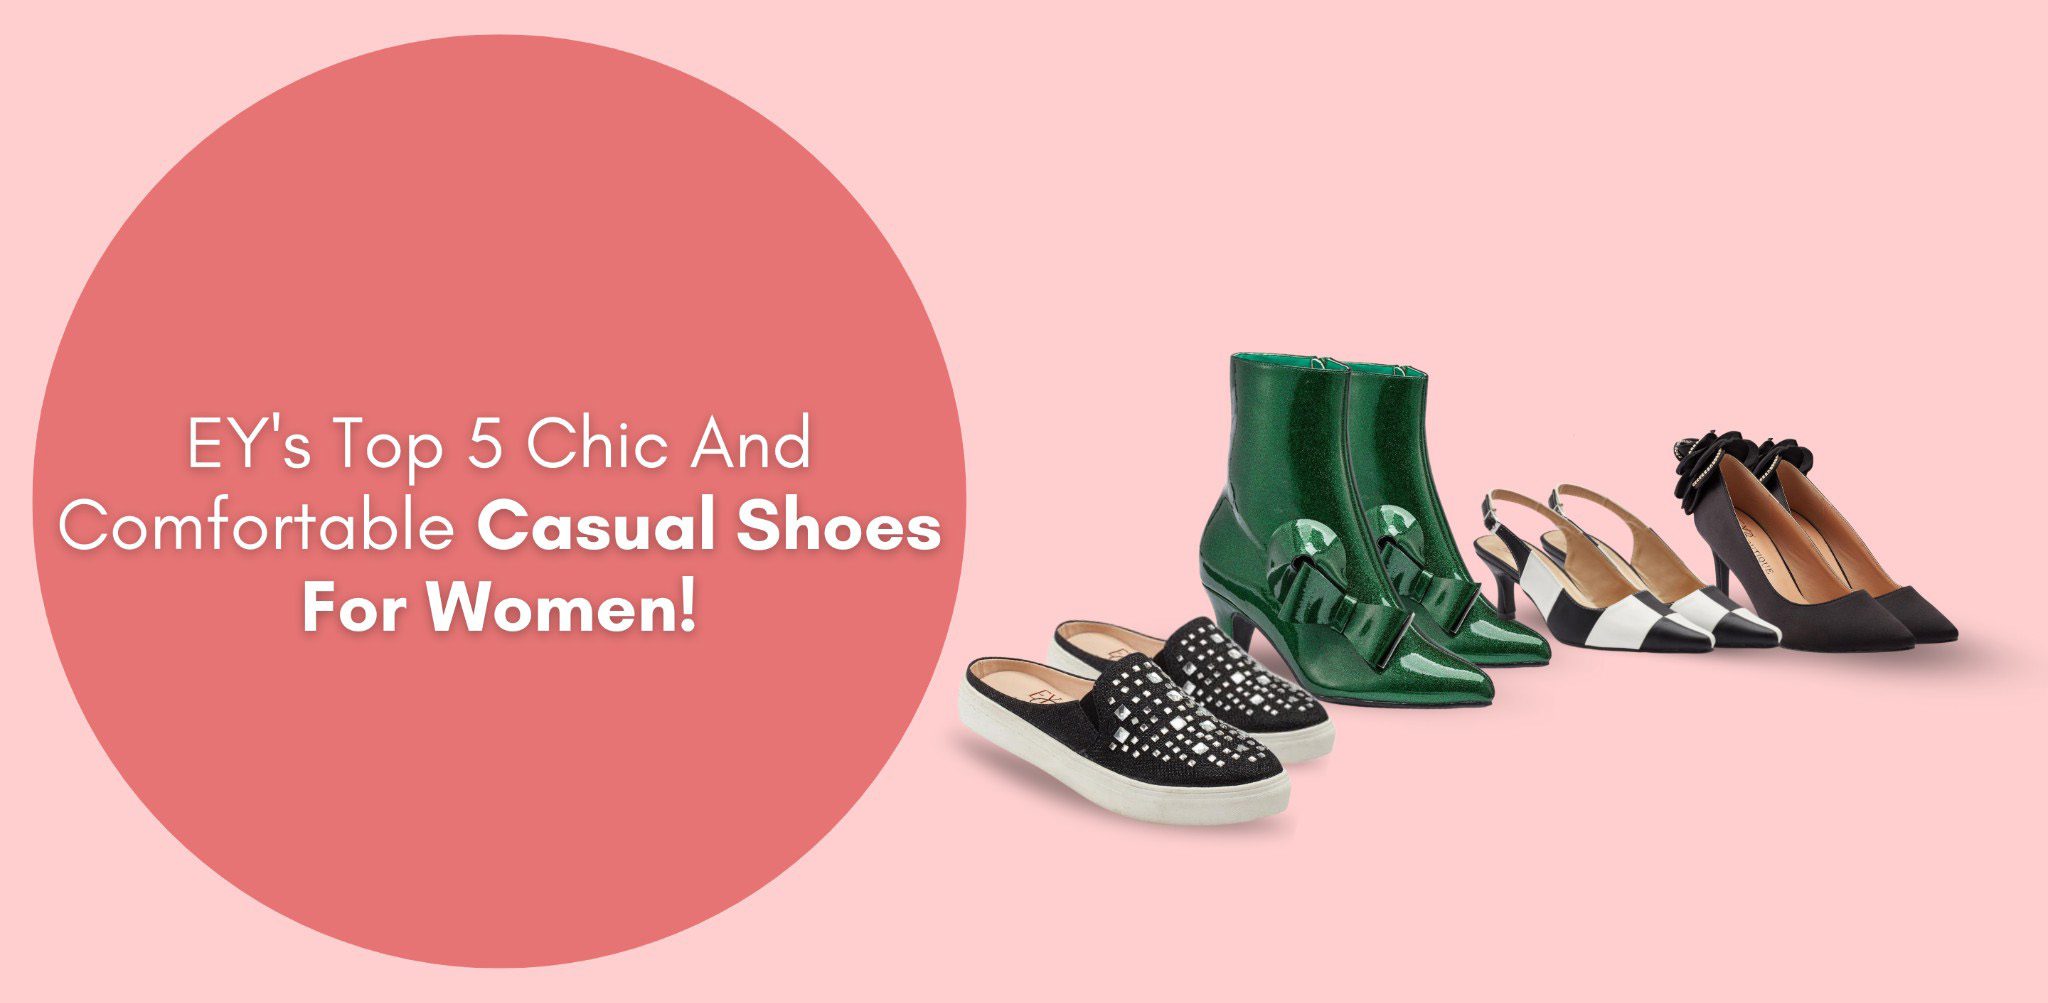 EY’s Top 5 Chic And Comfortable Casual Shoes For Women!